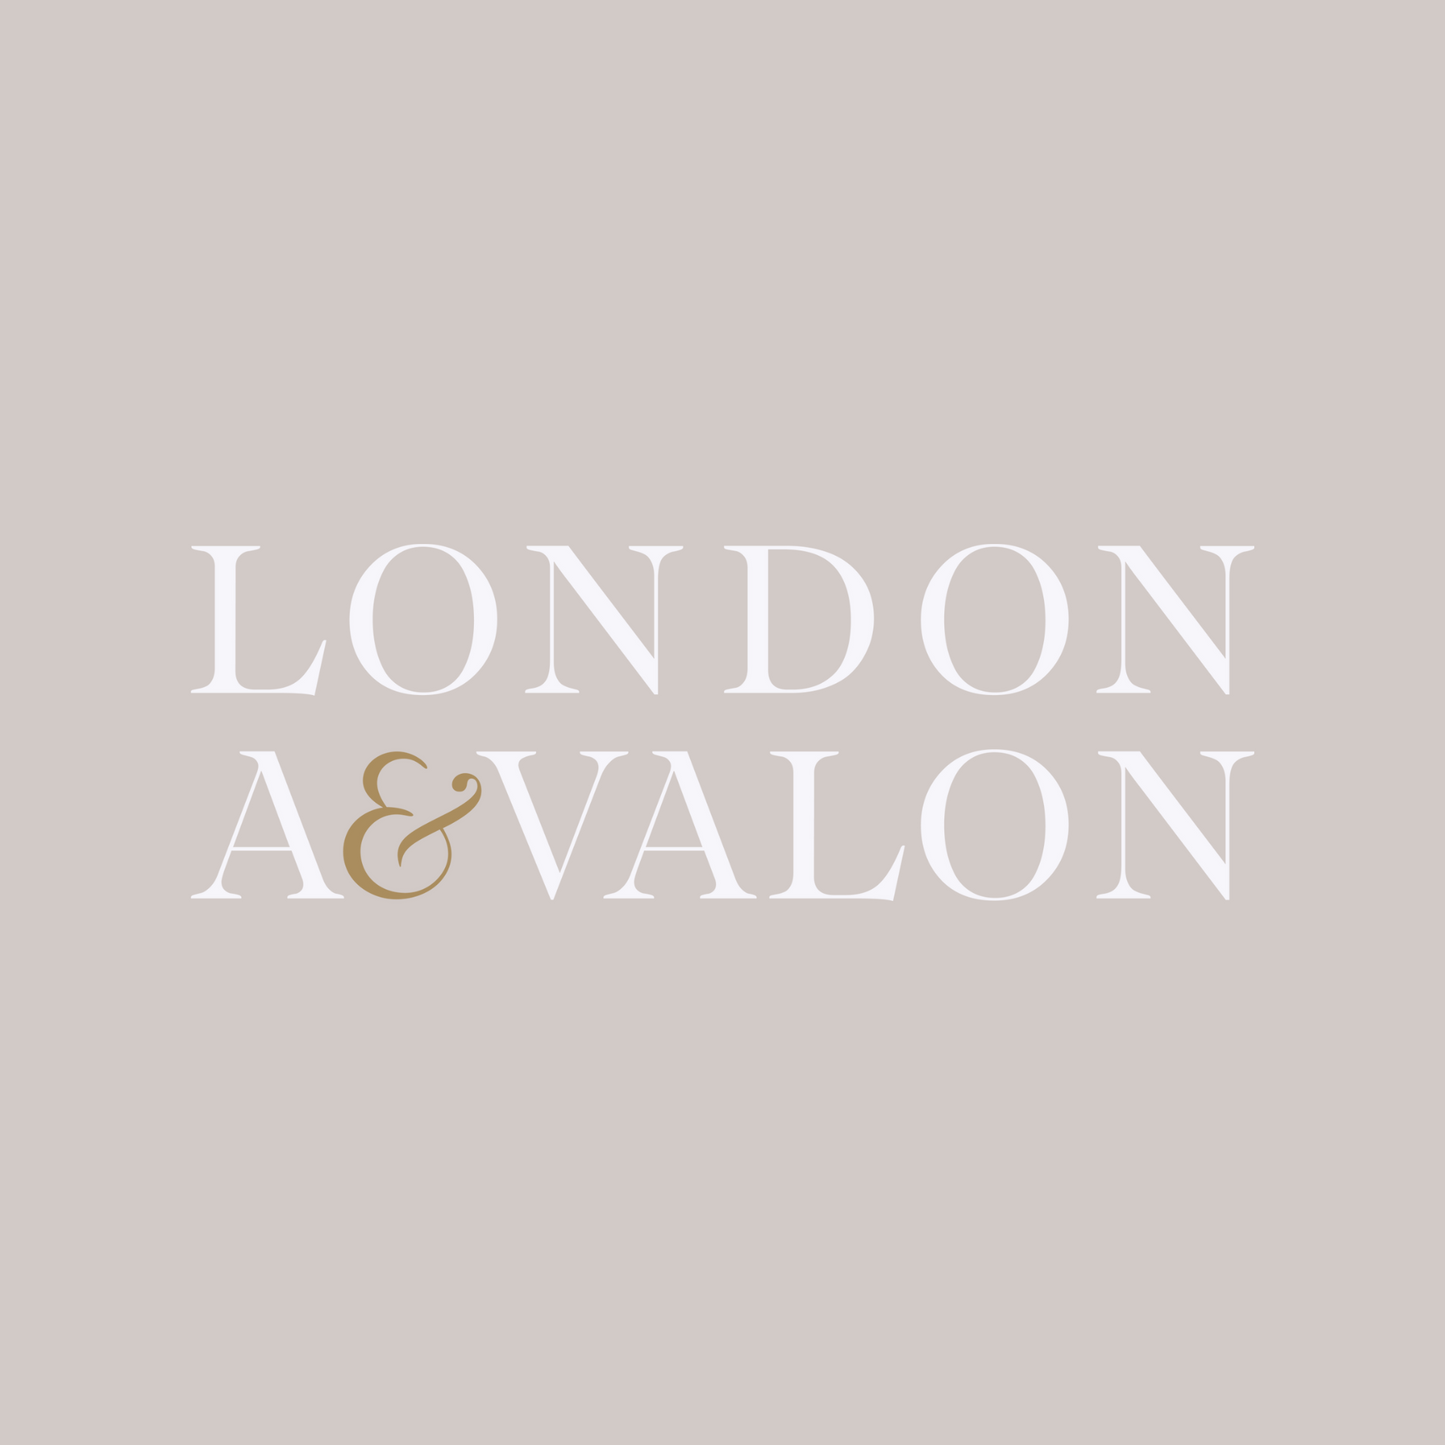 Would you like to add initials or letters to this product? - London and Avalon